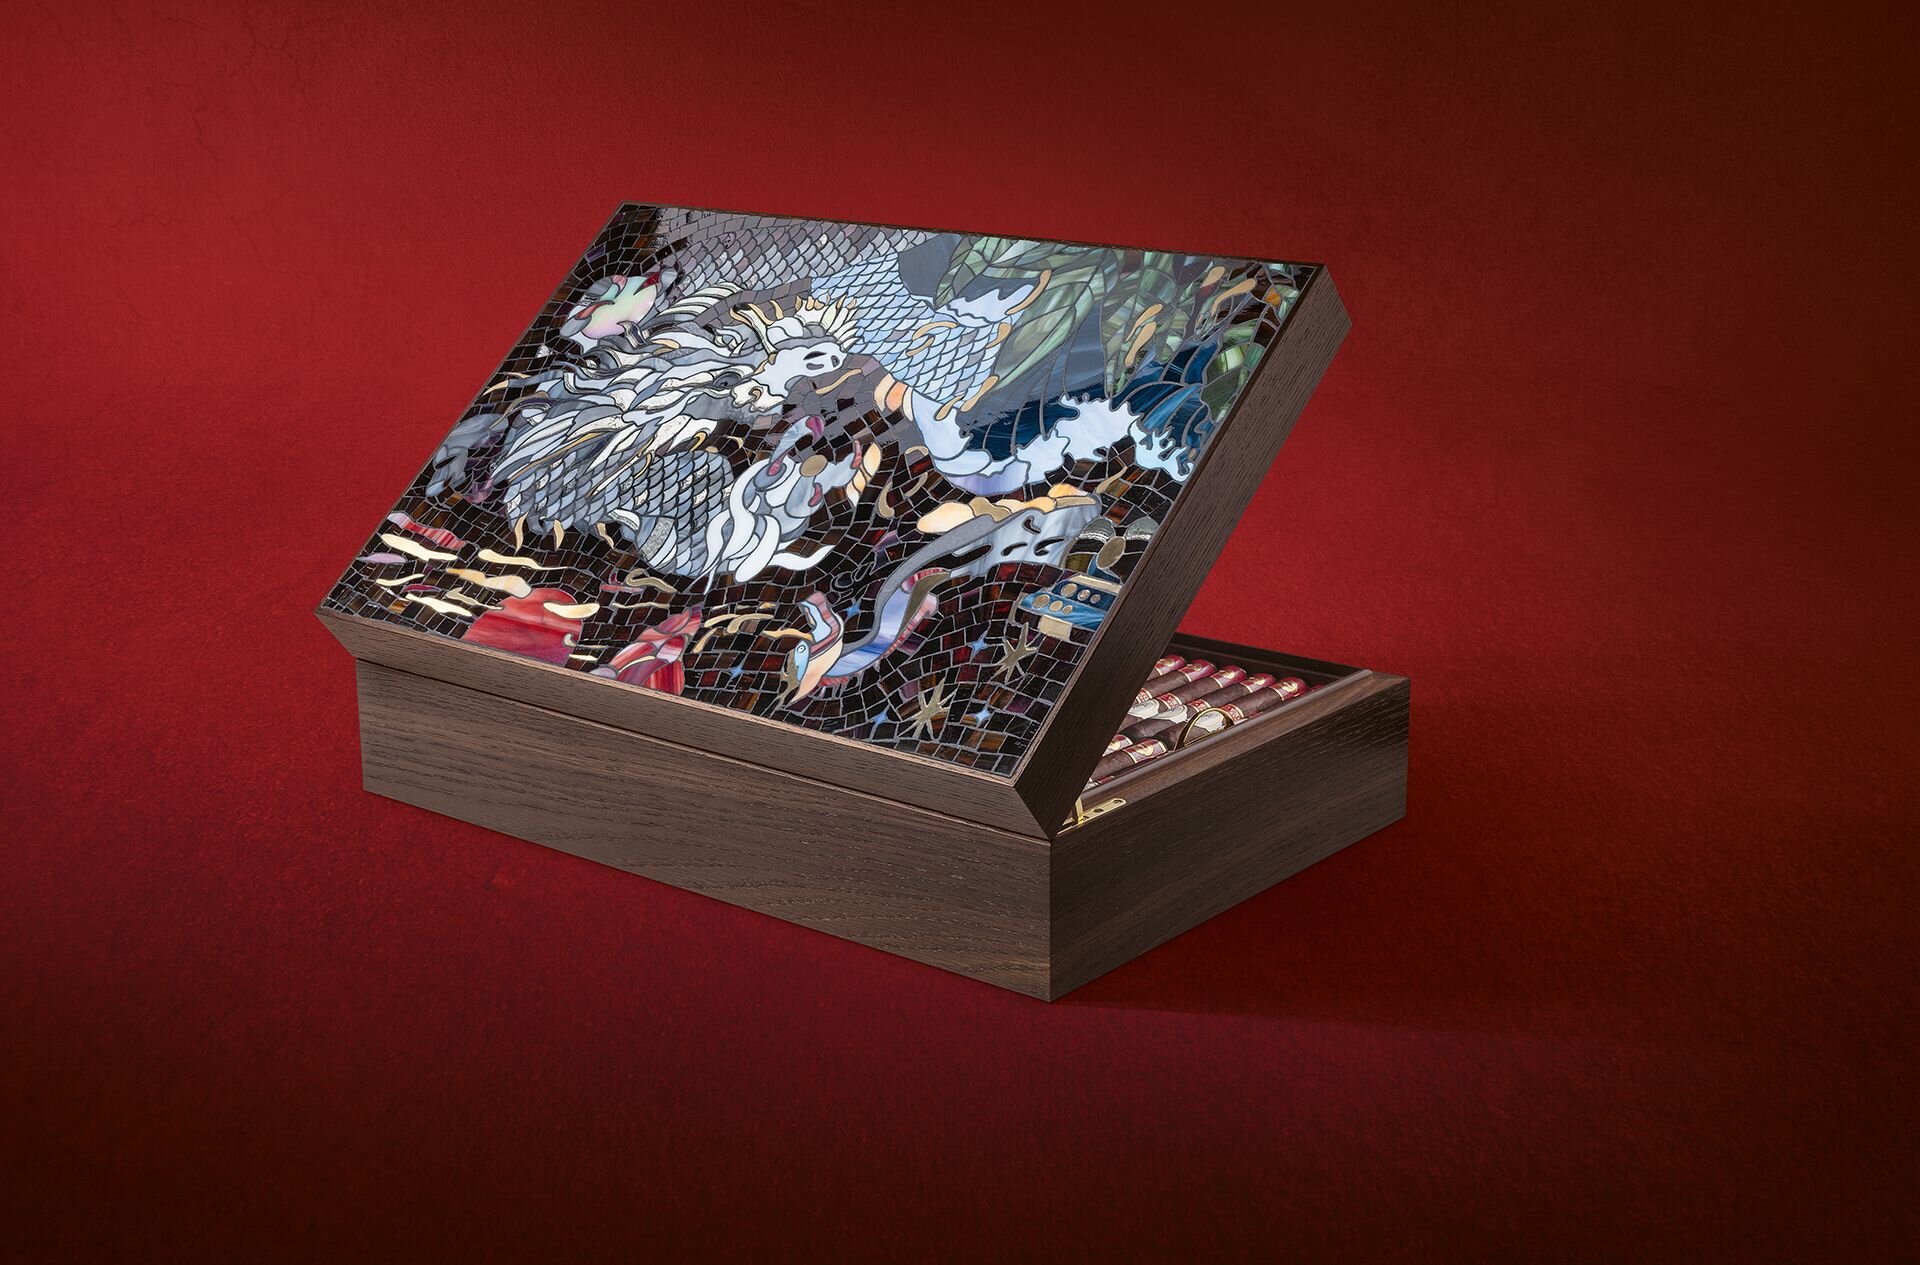 Davidoff Year of the Dragon Masterpiece Humidor with the dragon mosaic after the oil painting by Zhang Zhaoying.